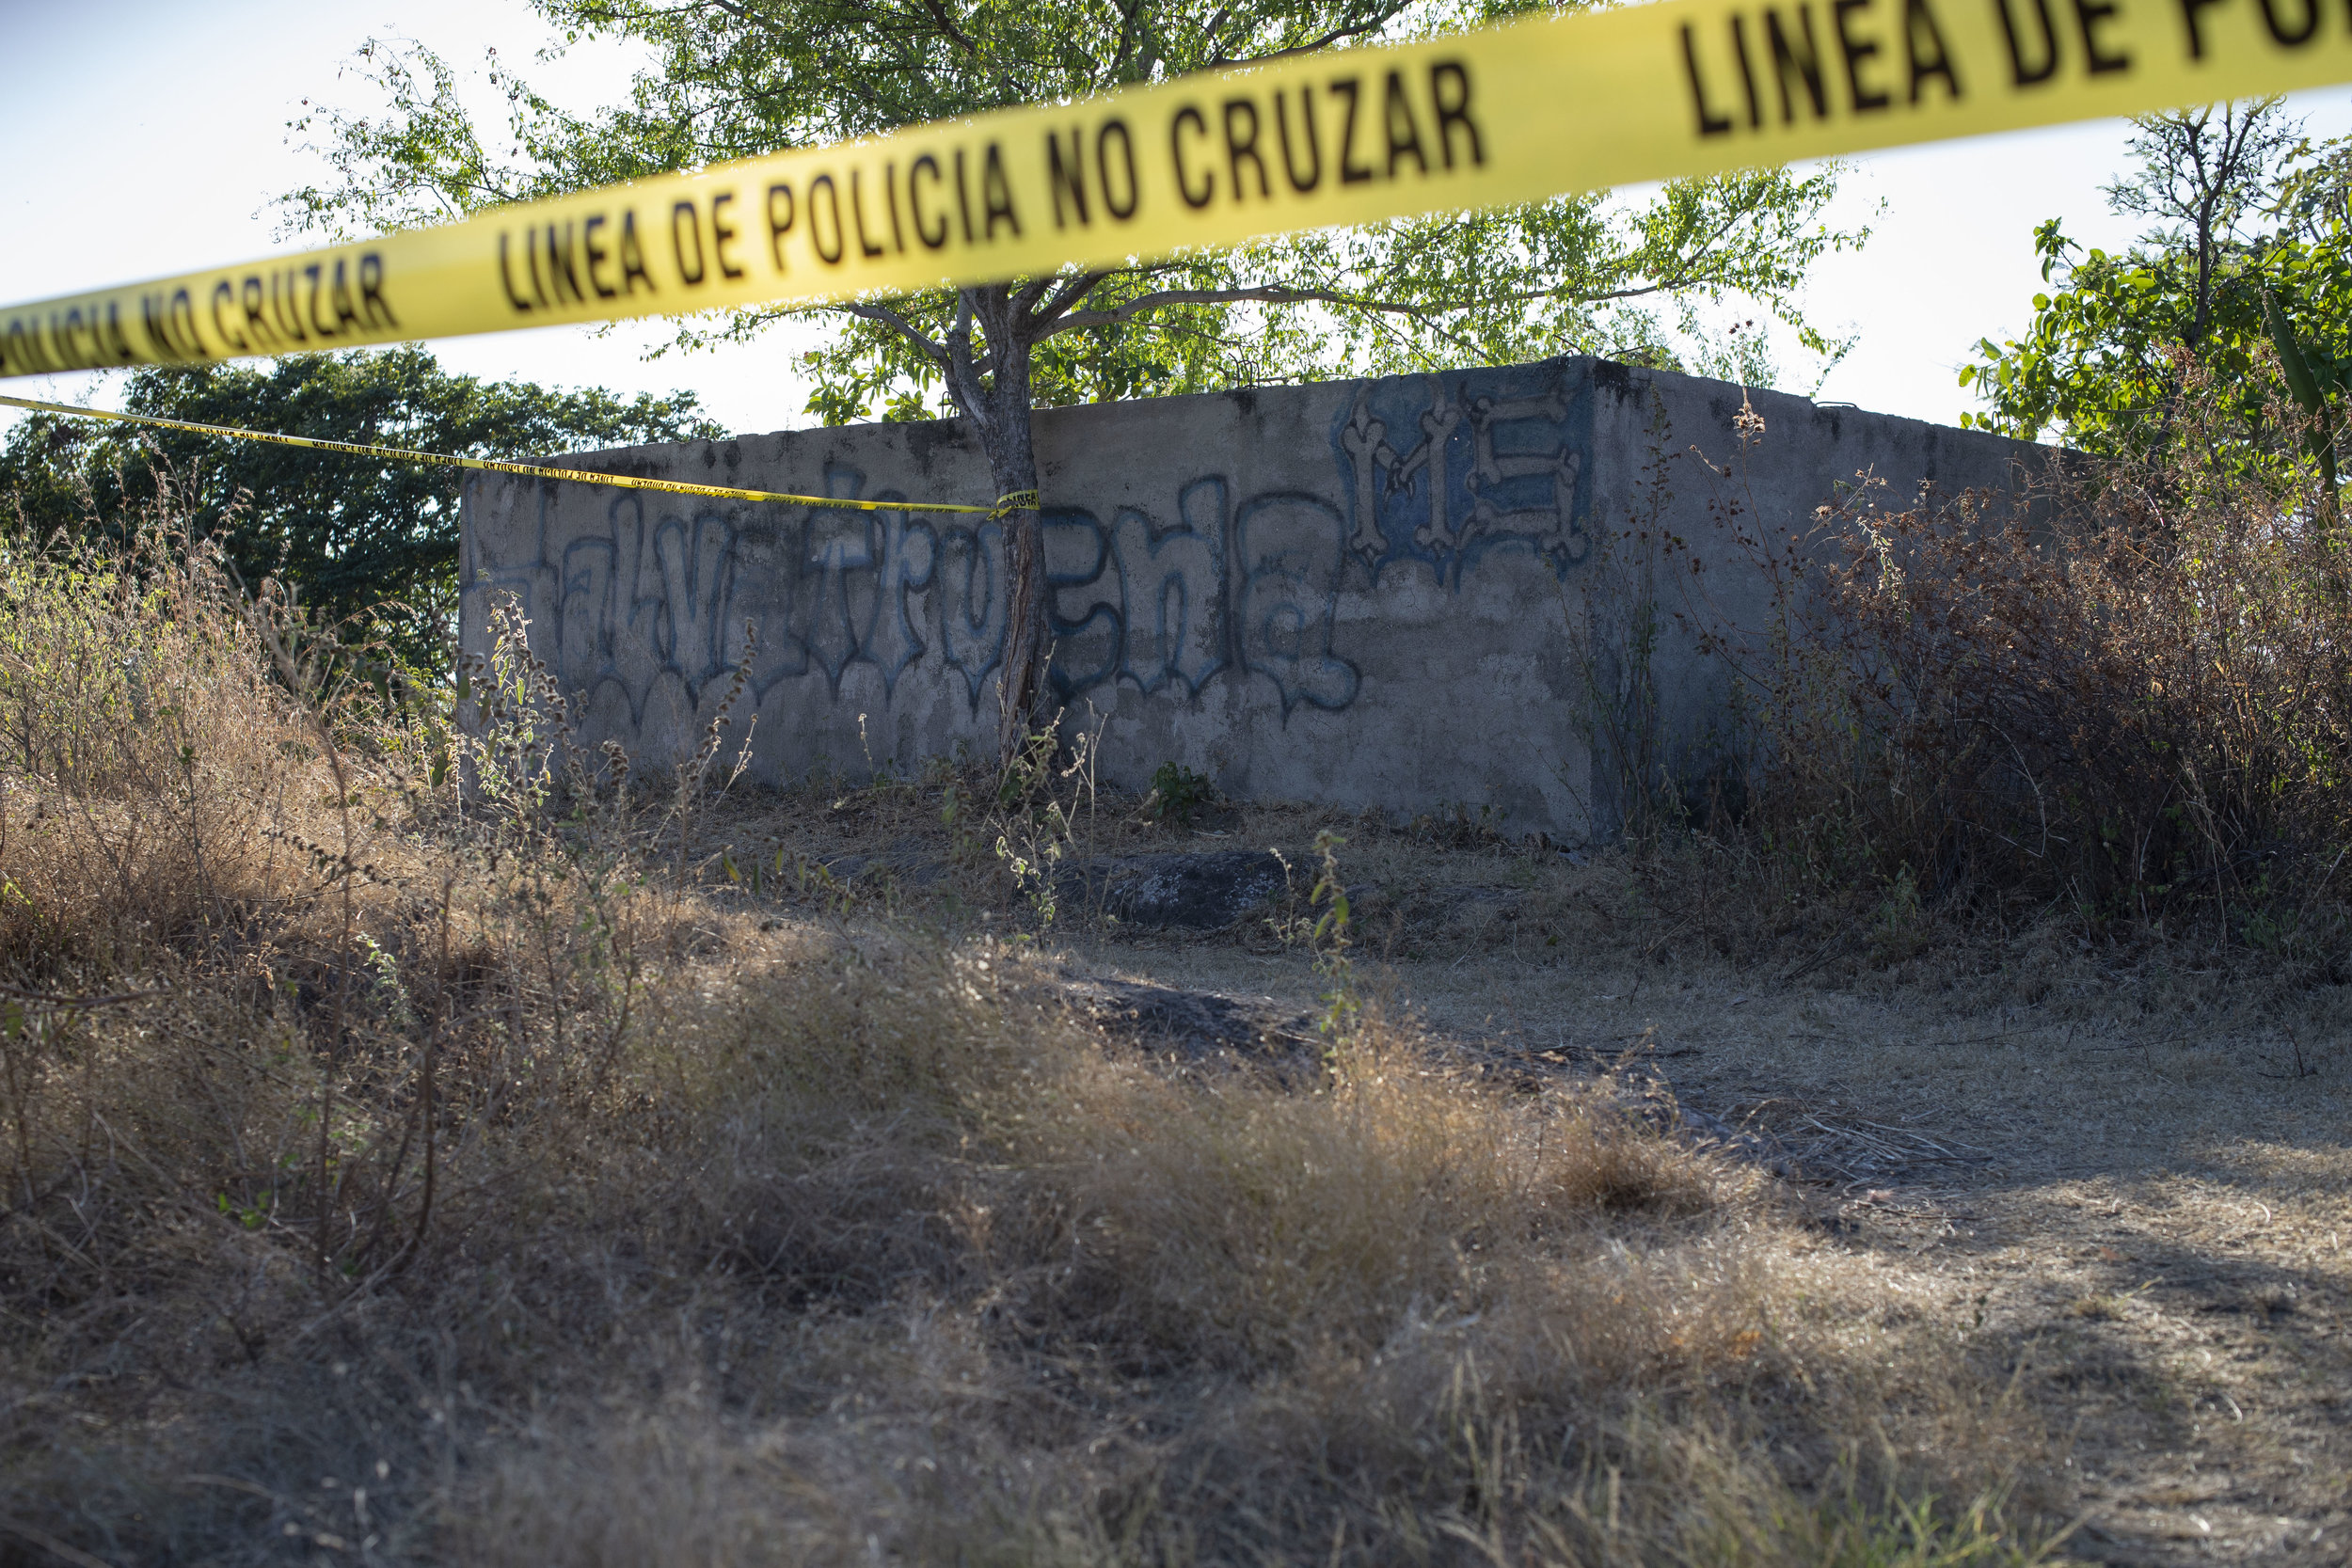  The homicide scene of a gang member named “Stupid Ant” in the outskirts of San Salvador, El Salvador.  